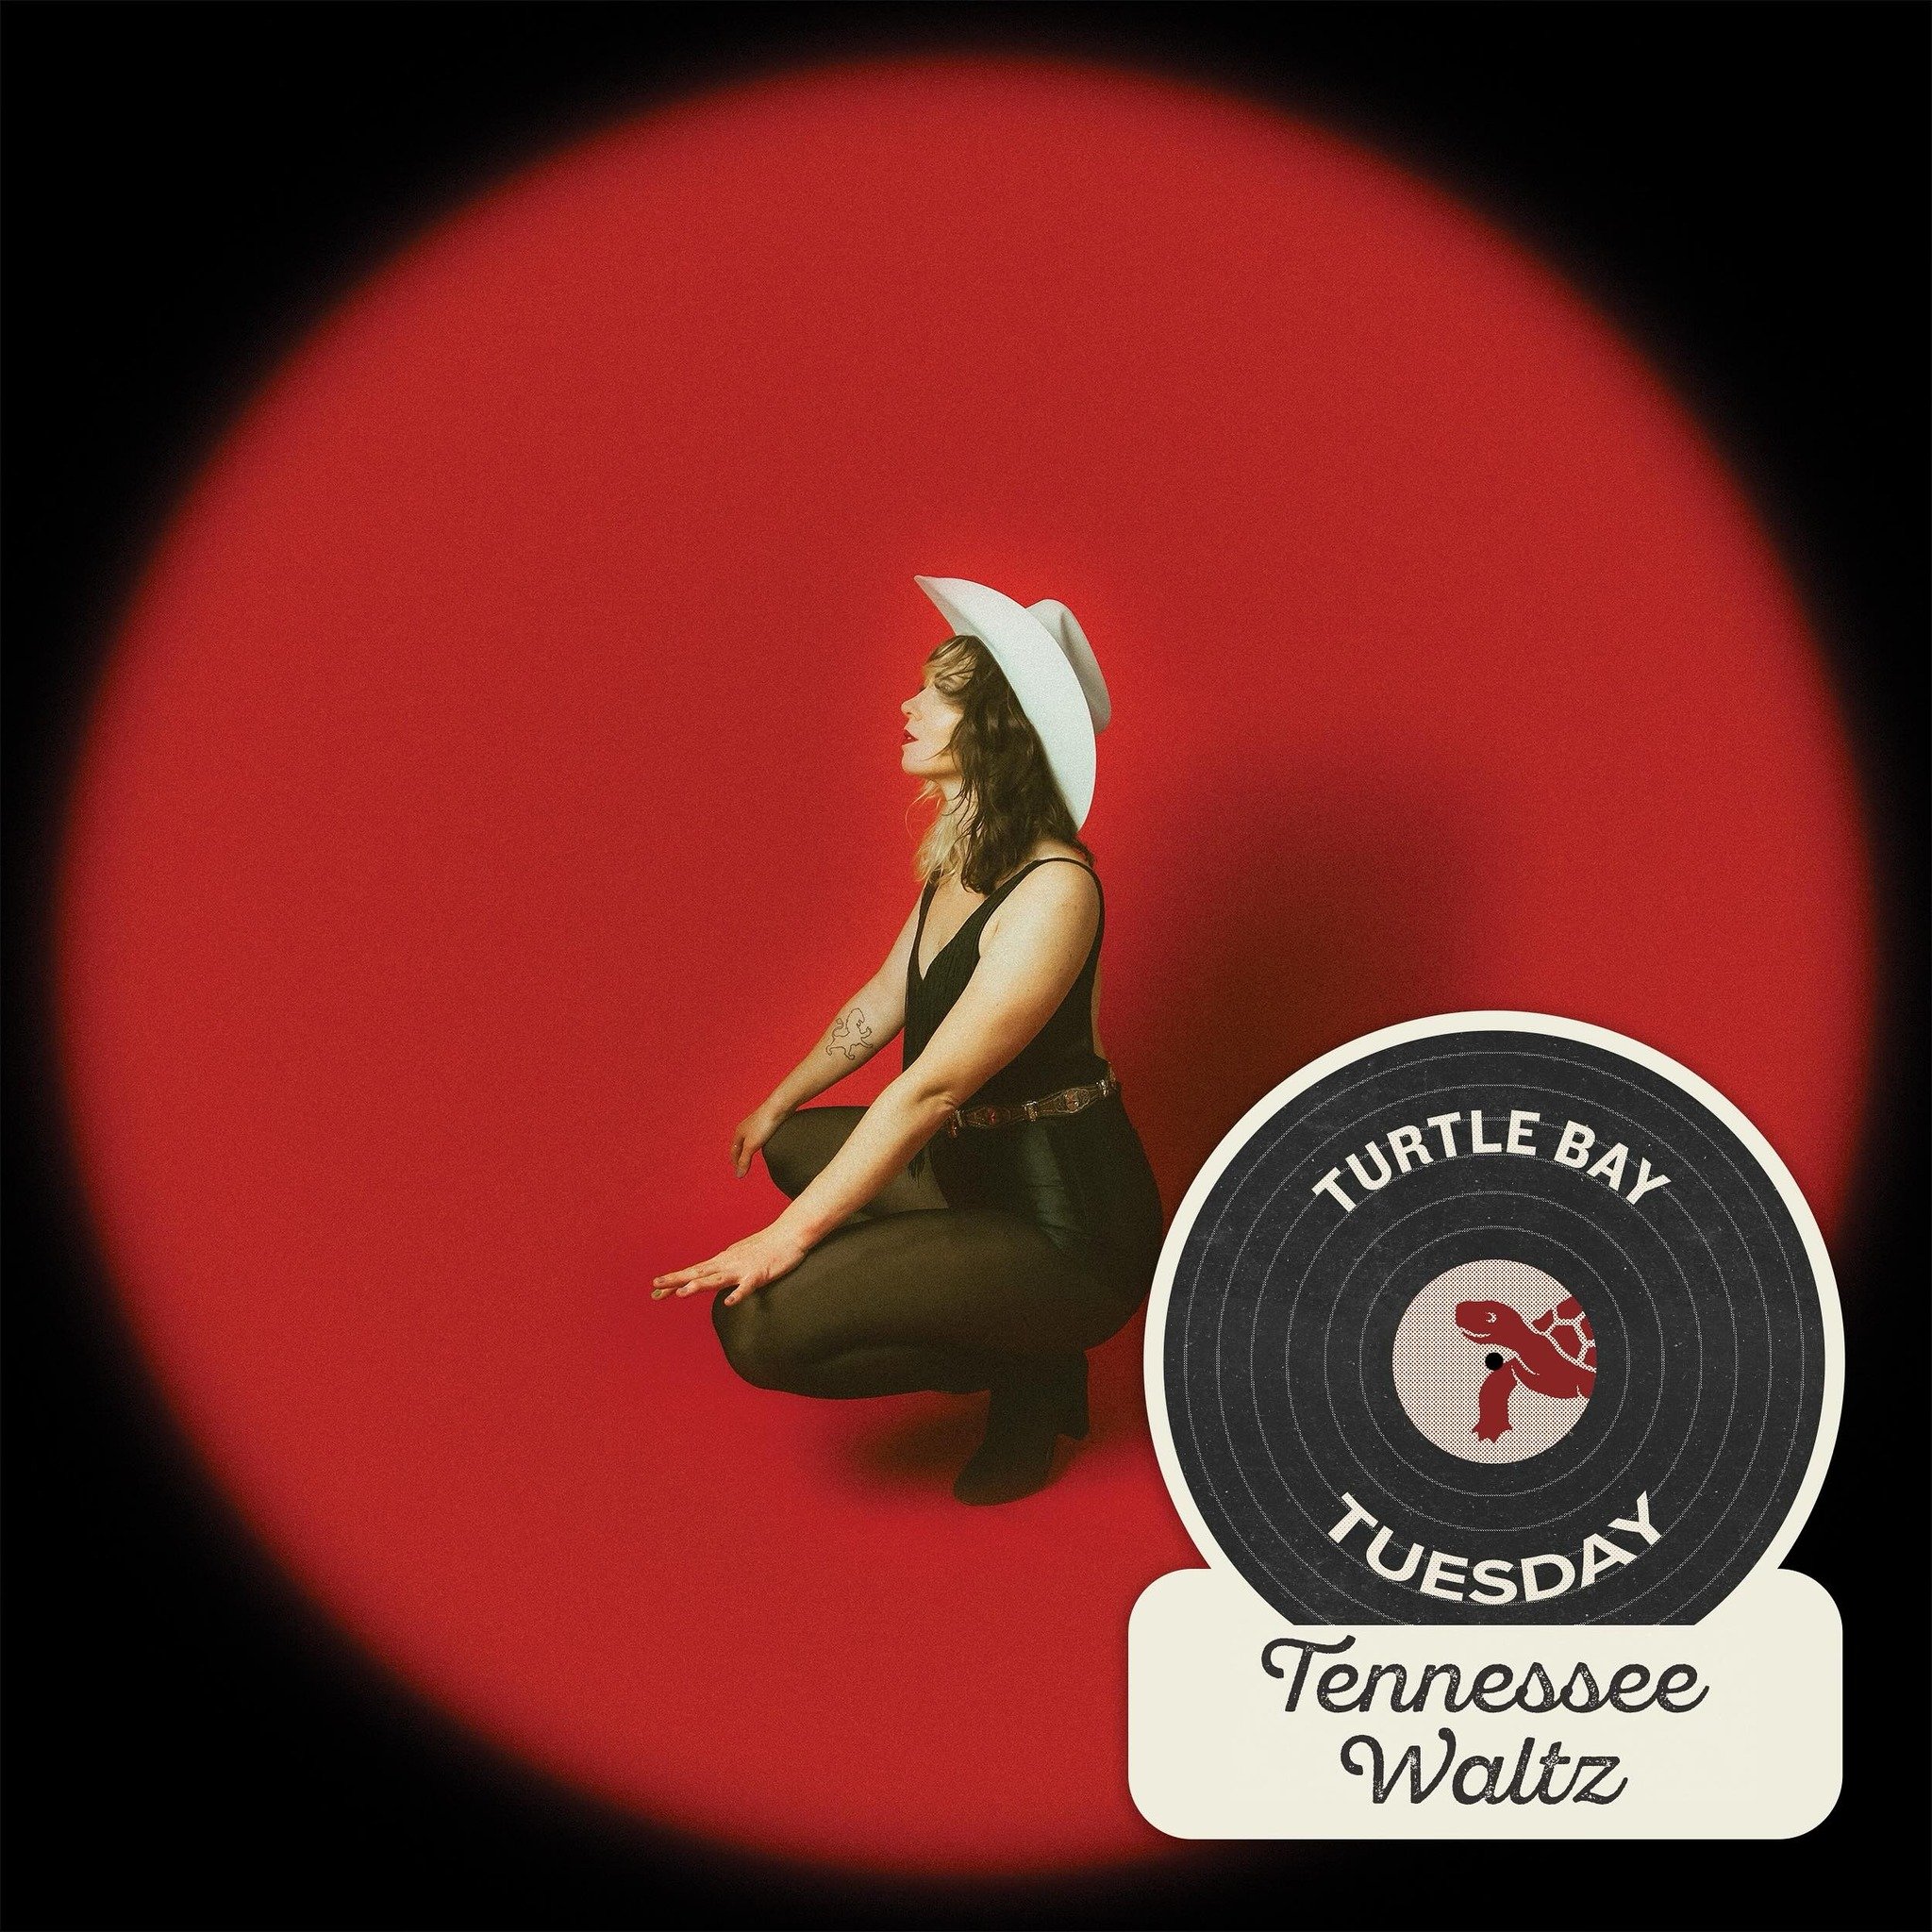 This weeks #turtlebaytuesday is &lsquo;Tennessee Waltz&rsquo; by Sweet Megg. You can listen on your favorite streaming service or, better still, go to turtlebayrecords.com to buy the album and shop the whole catalogue. 
.
.
.
.
#turtlebaytuesday #tur